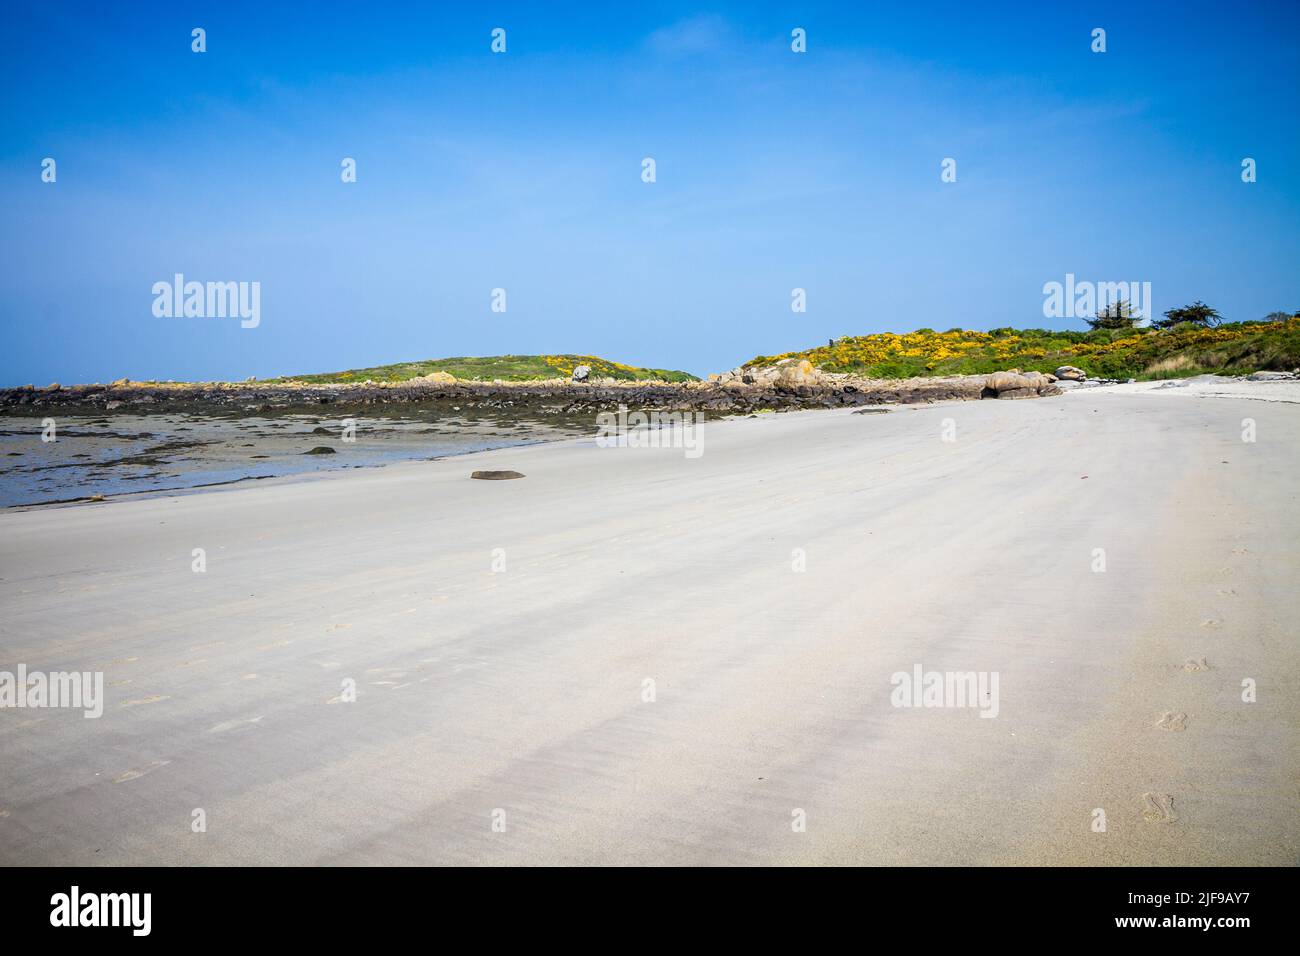 Chausey island coast, beach and cliffs landscape in Brittany, France Stock Photo